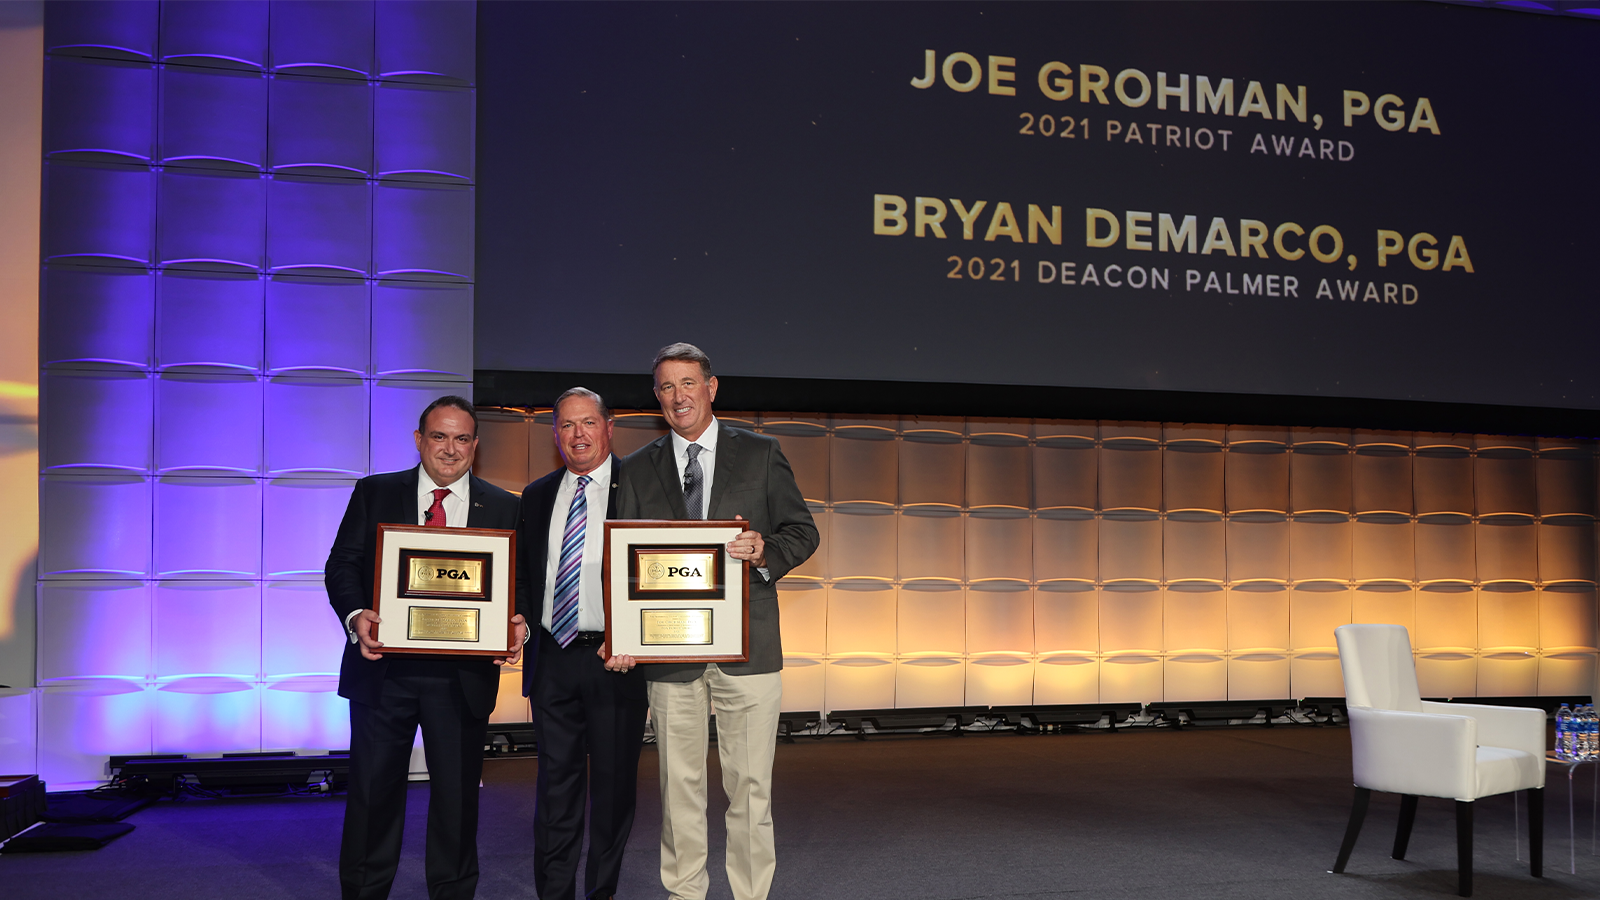 PGA of America President Jim Richerson poses for a photo with the winner of the Deacon Palmer Award Bryan Demarco and winner of the Patriot Award Joe Grohman during the PGA Special Awards night for the 106th PGA Annual Meeting at JW Marriott Phoenix Desert Ridge Resort & Spa on Tuesday, November 1, 2022 in Phoenix, Arizona. (Photo by Sam Greenwood/PGA of America)